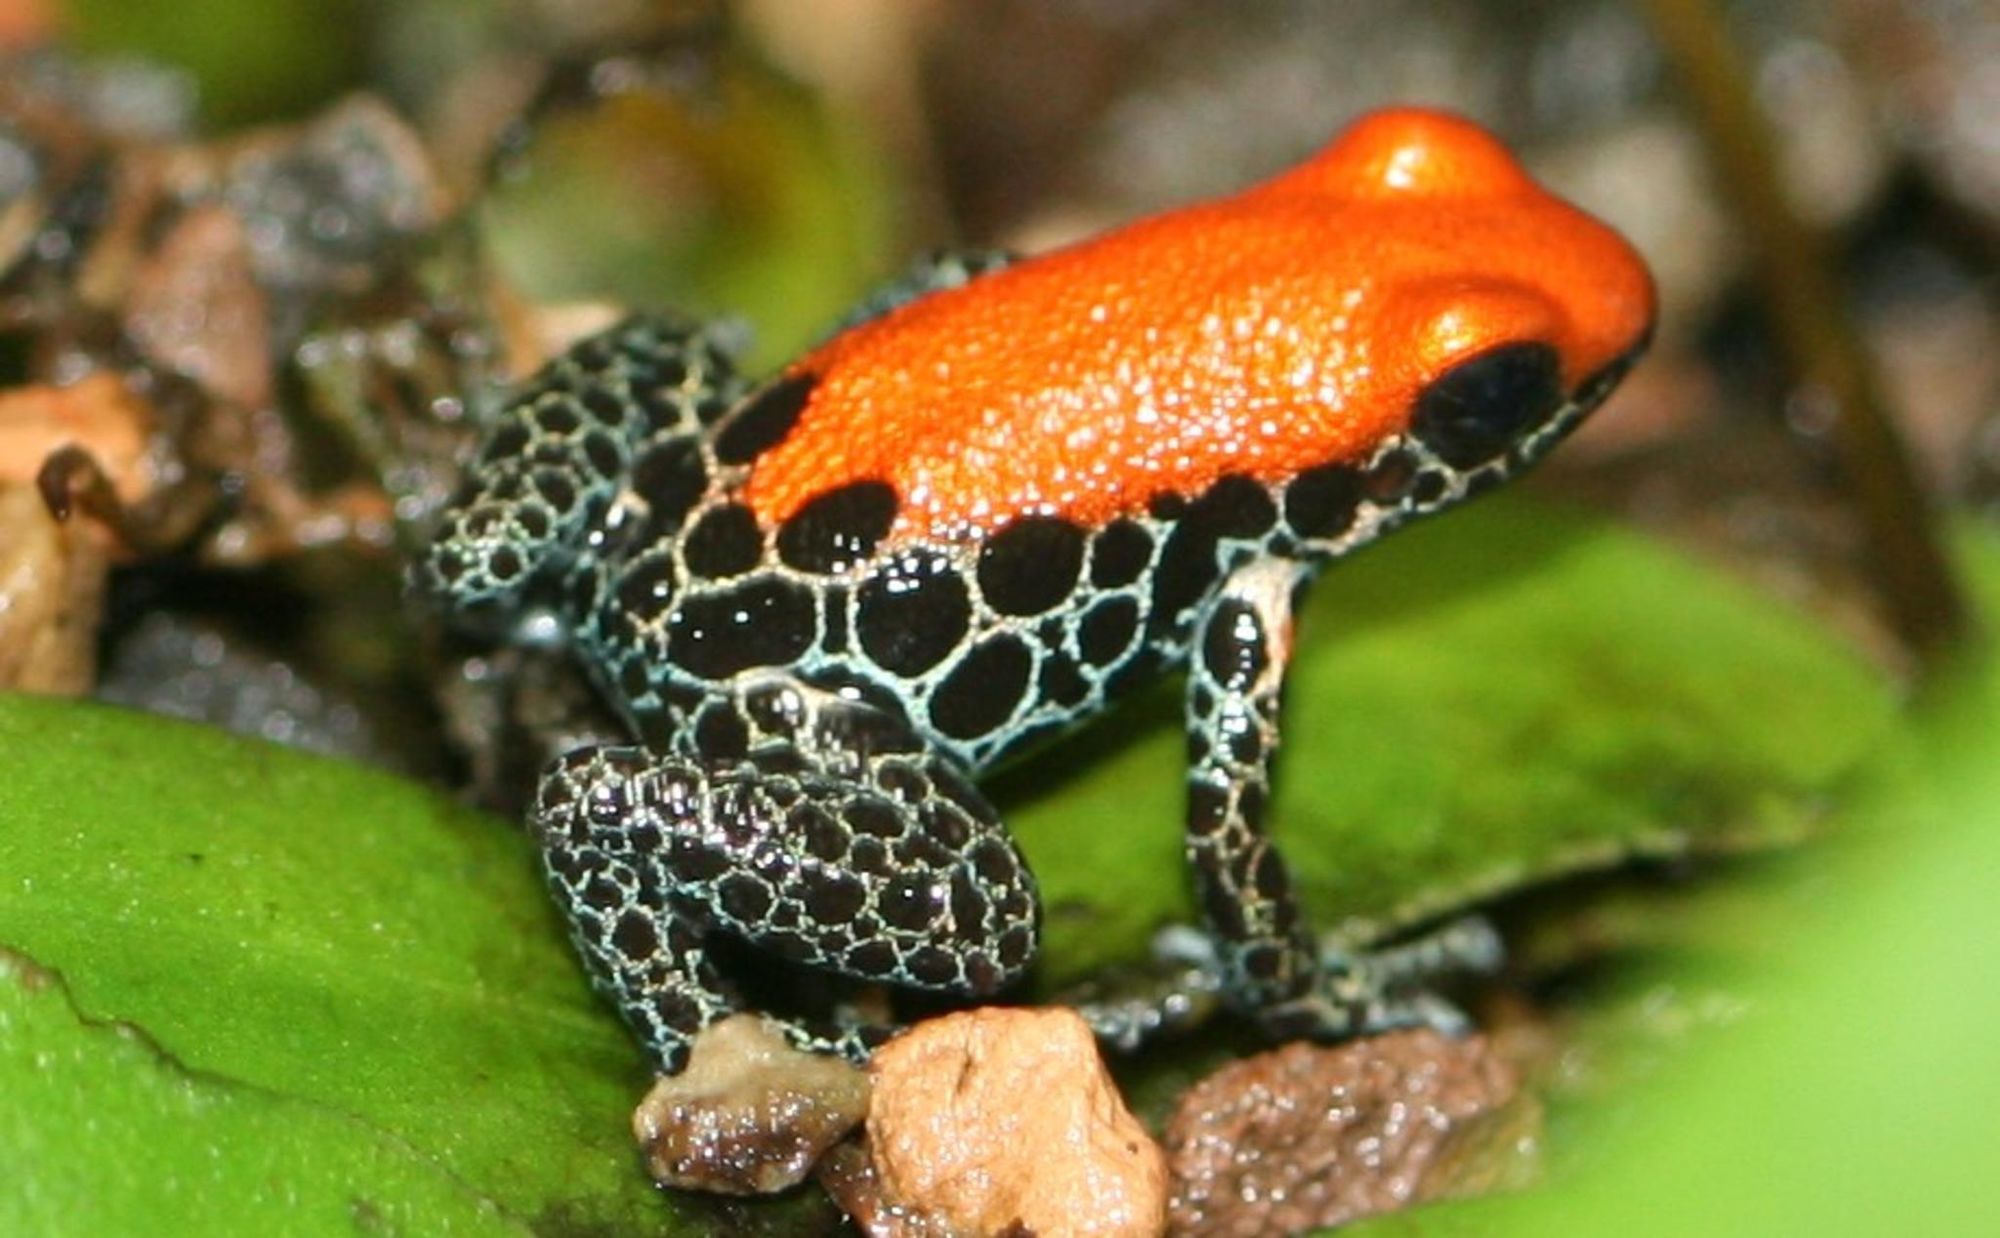 Red backed poison frogs Arena Pile Top 10 Most Poisonous Frogs On Earth In The World